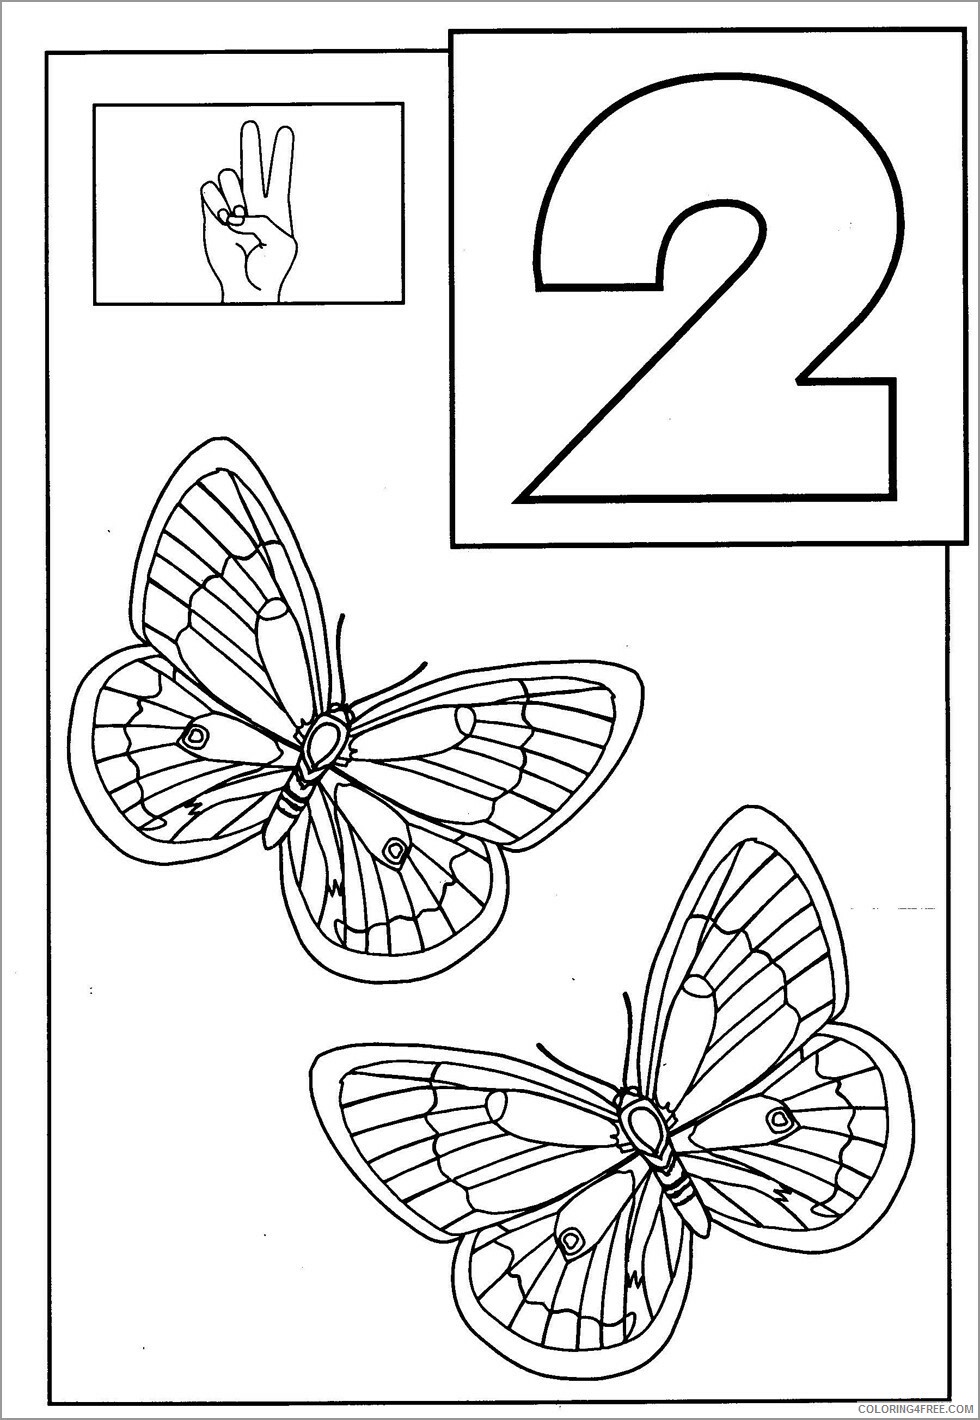 Butterfly Coloring Pages Animal Printable Sheets 2 butterflies 2021 0636 Coloring4free